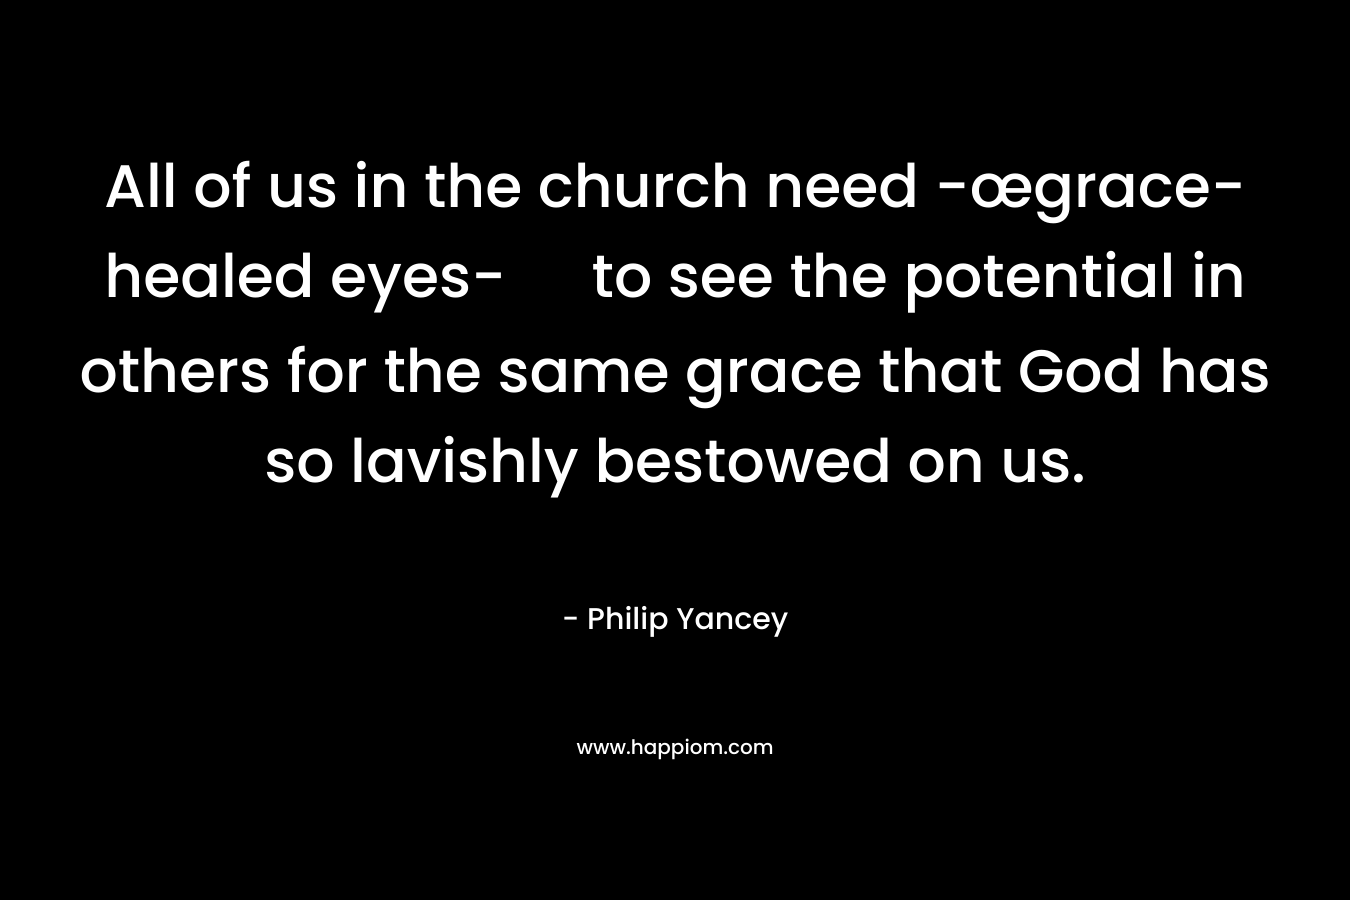 All of us in the church need -œgrace-healed eyes- to see the potential in others for the same grace that God has so lavishly bestowed on us. – Philip Yancey